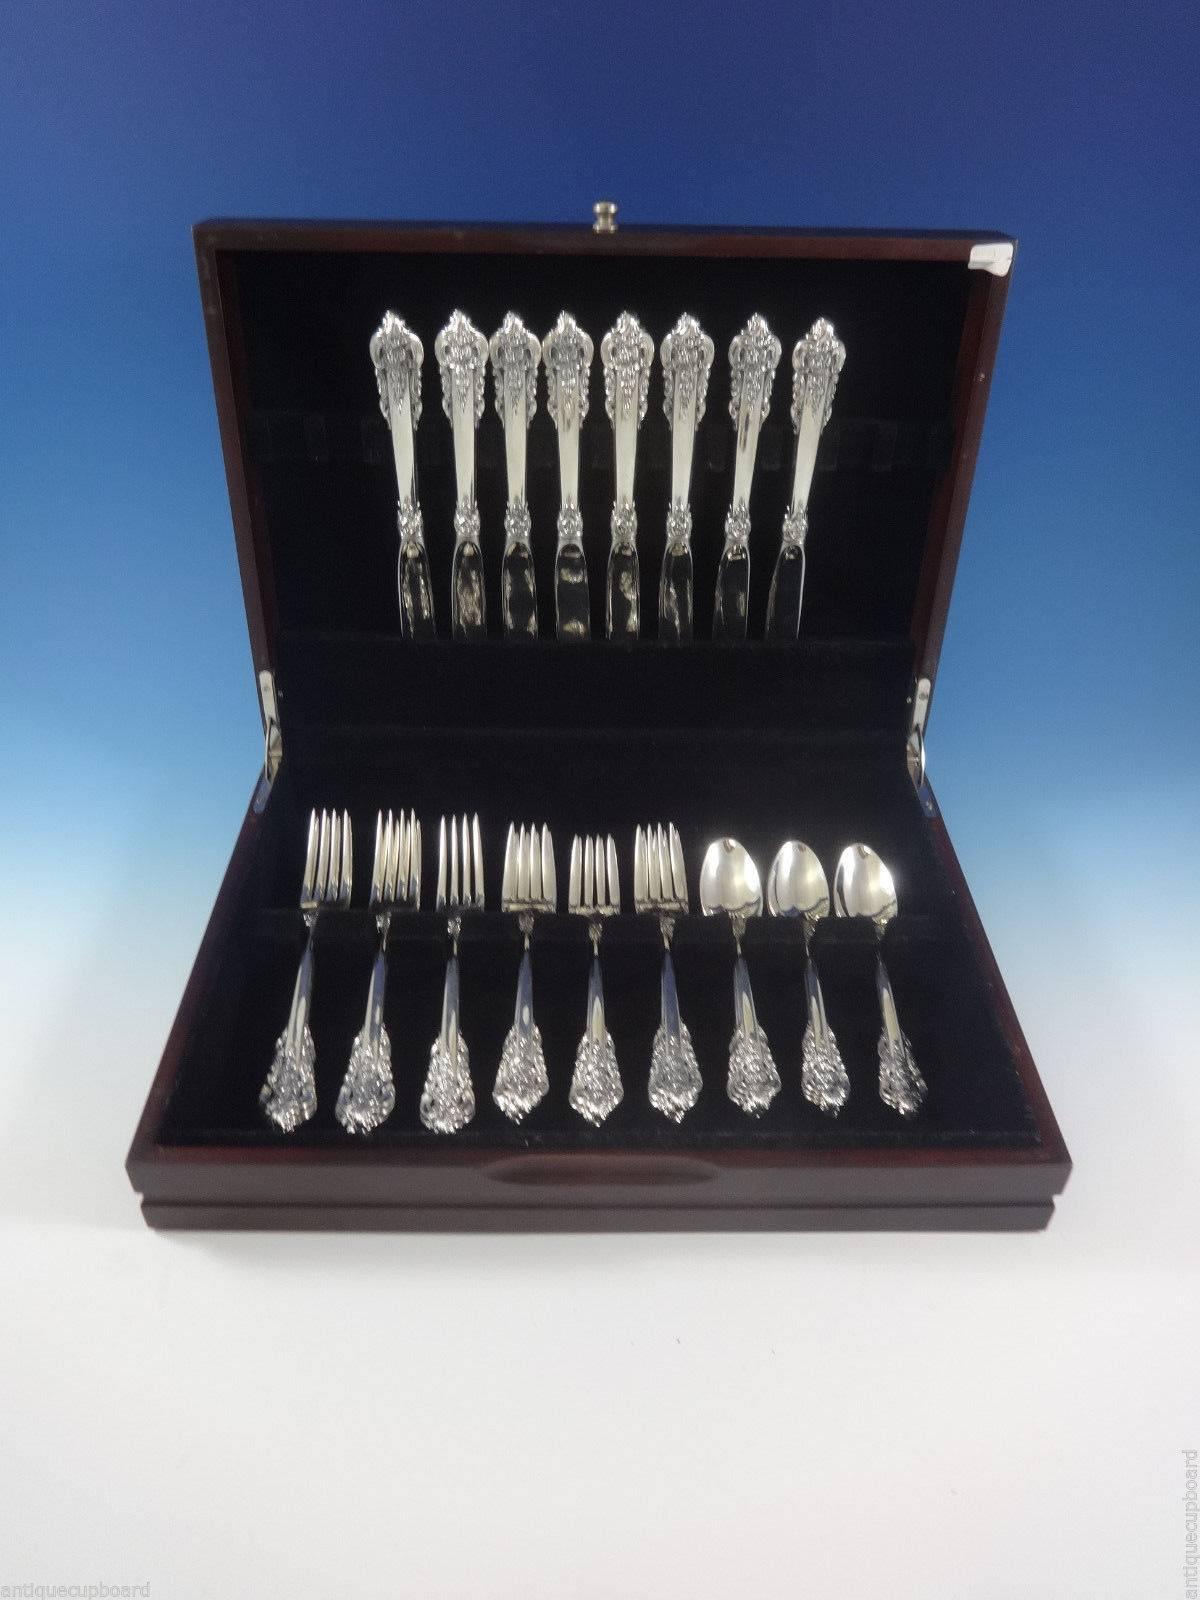 Grande baroque by Wallace sterling silver flatware set of 32 pieces. This set includes: 8 Knives, 9